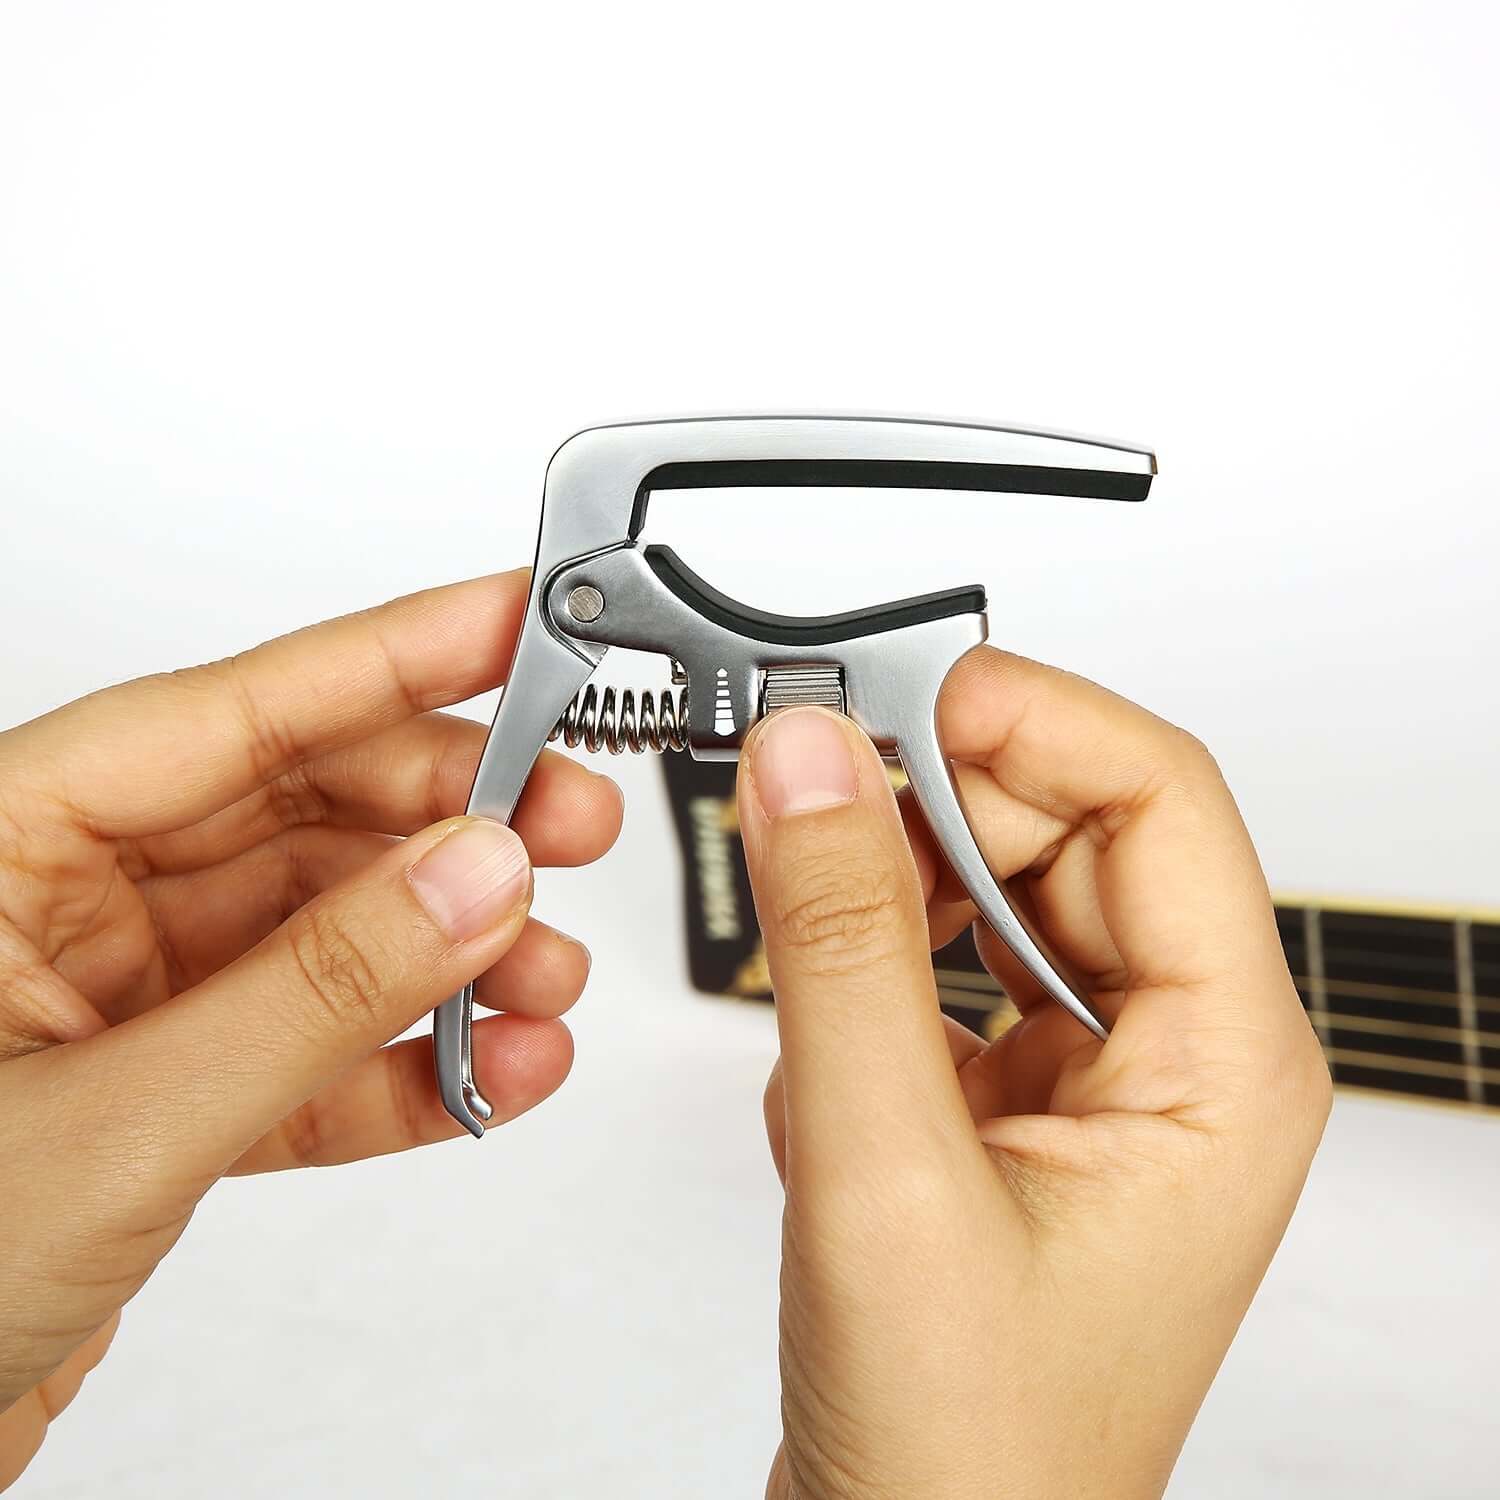 SGPRO Capo for Guitars Acoustic and Electric with Ajustable Spring and Trigger Tension, Handy String Pin Puller and Fashionable Hard Zinc Alloy Design